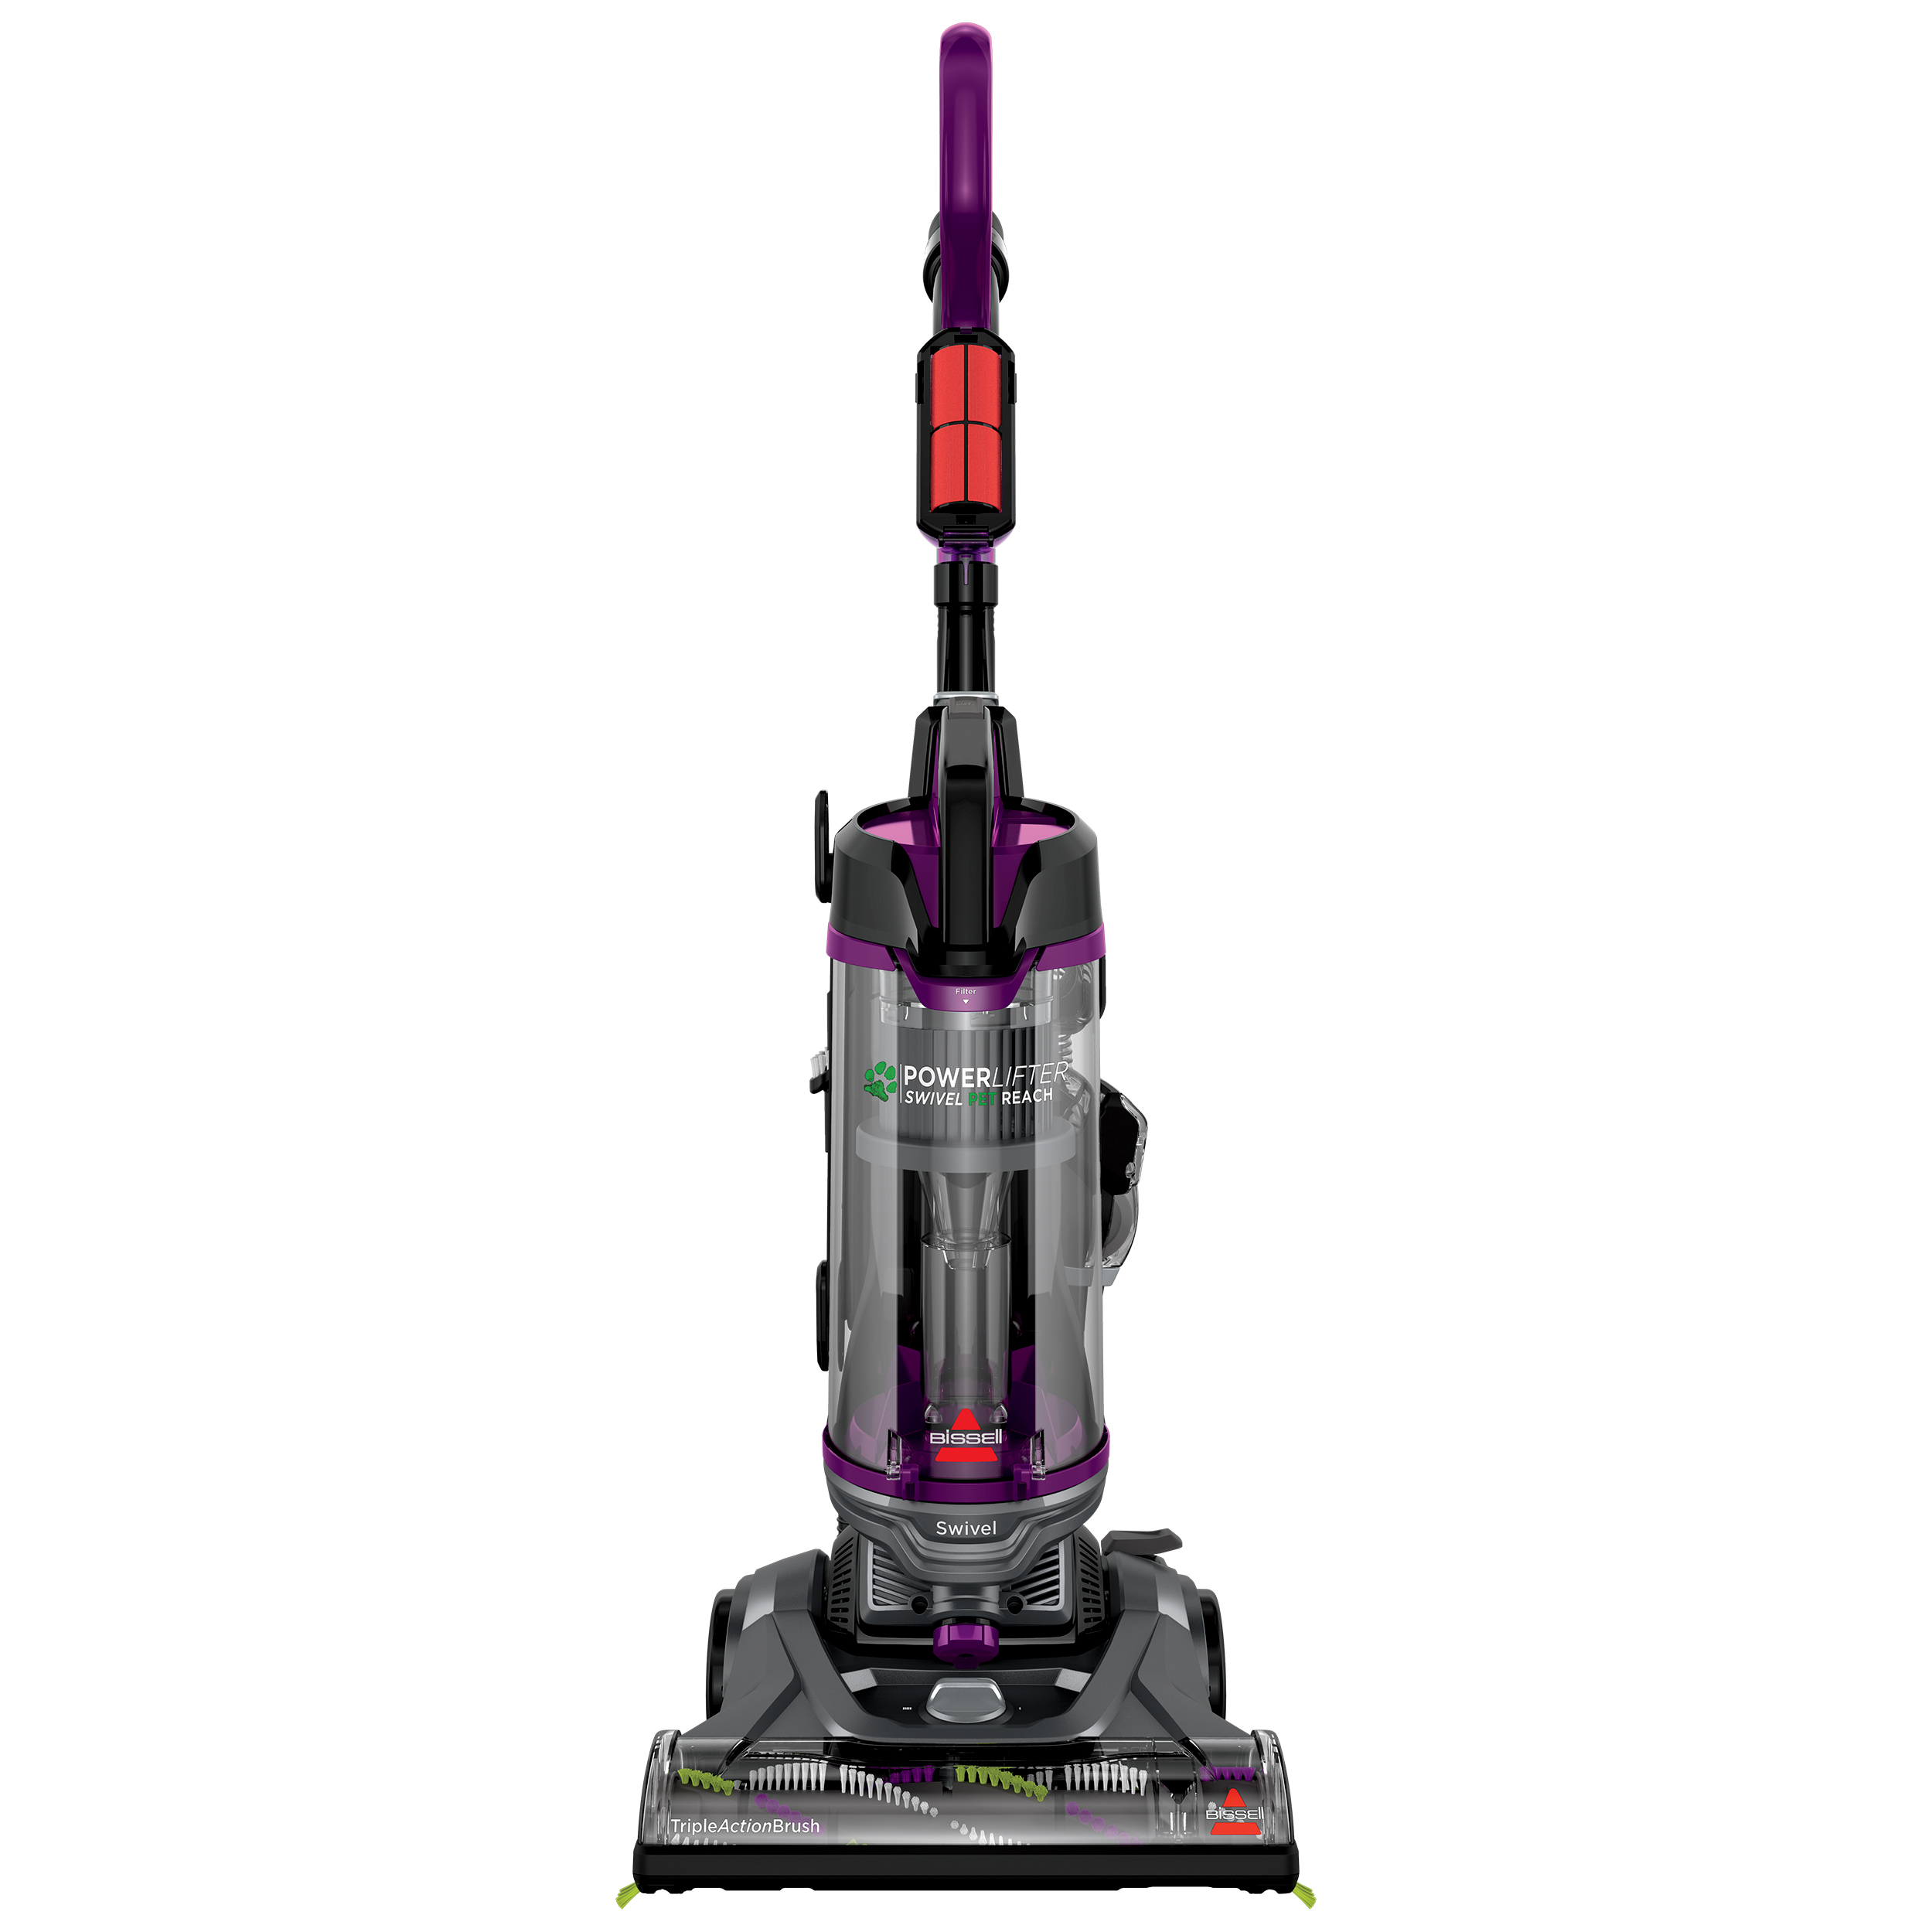 BISSELL PowerLifter Swivel Pet Reach Upright Vacuum 3196 - image 1 of 6